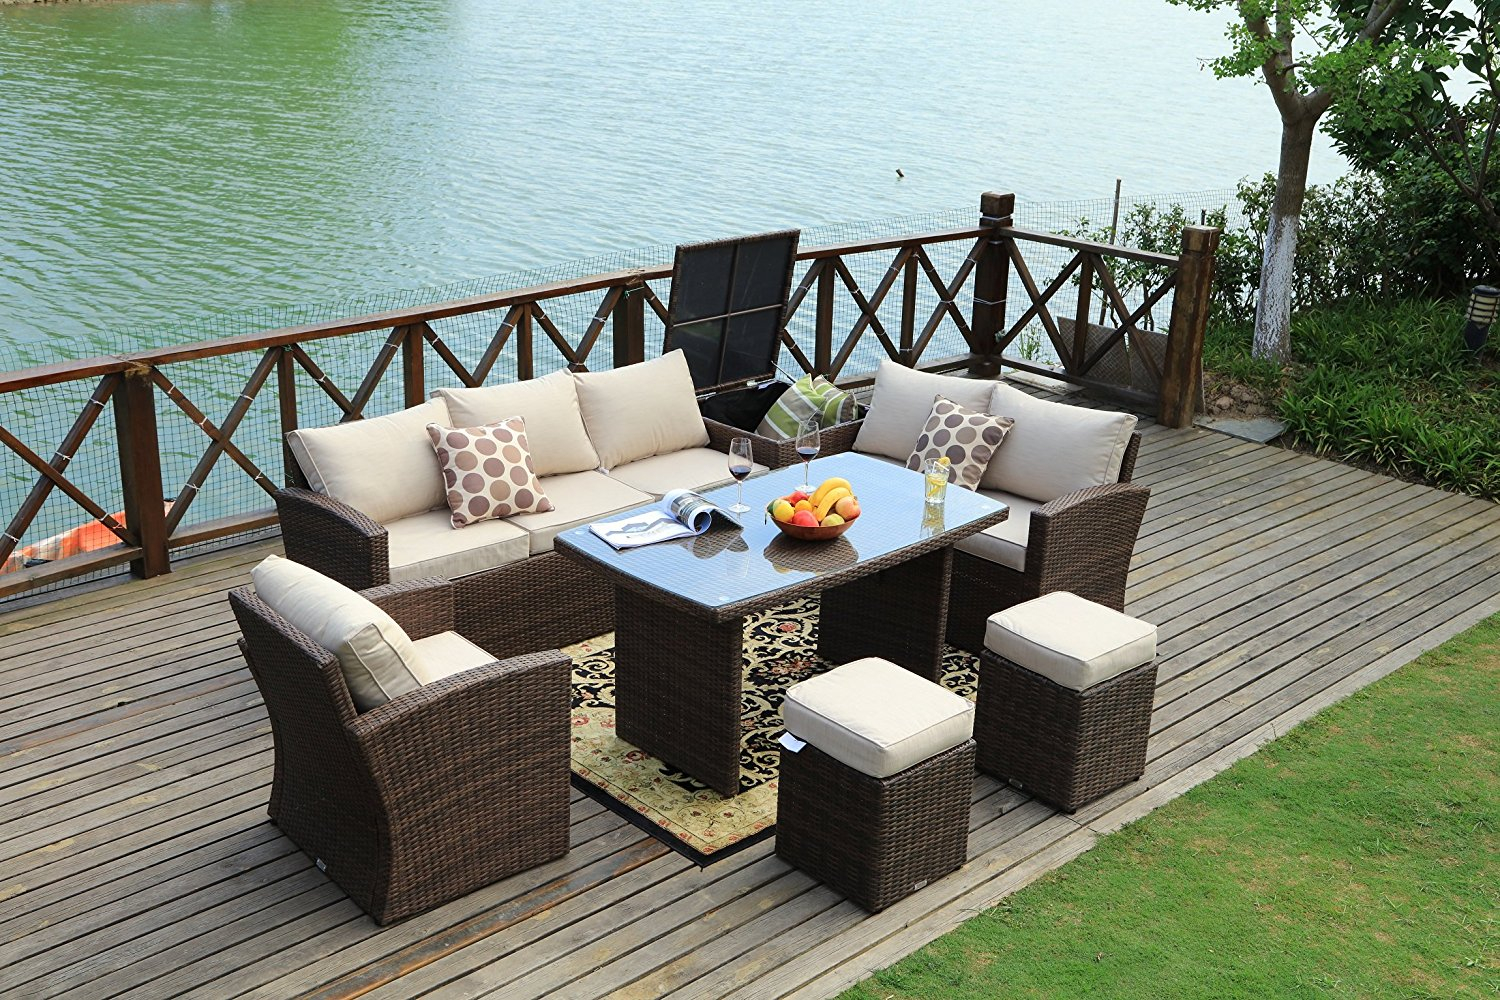 Mulan Brown Outdoor Patio Furniture Conversation Set 7 Piece within proportions 1500 X 1000